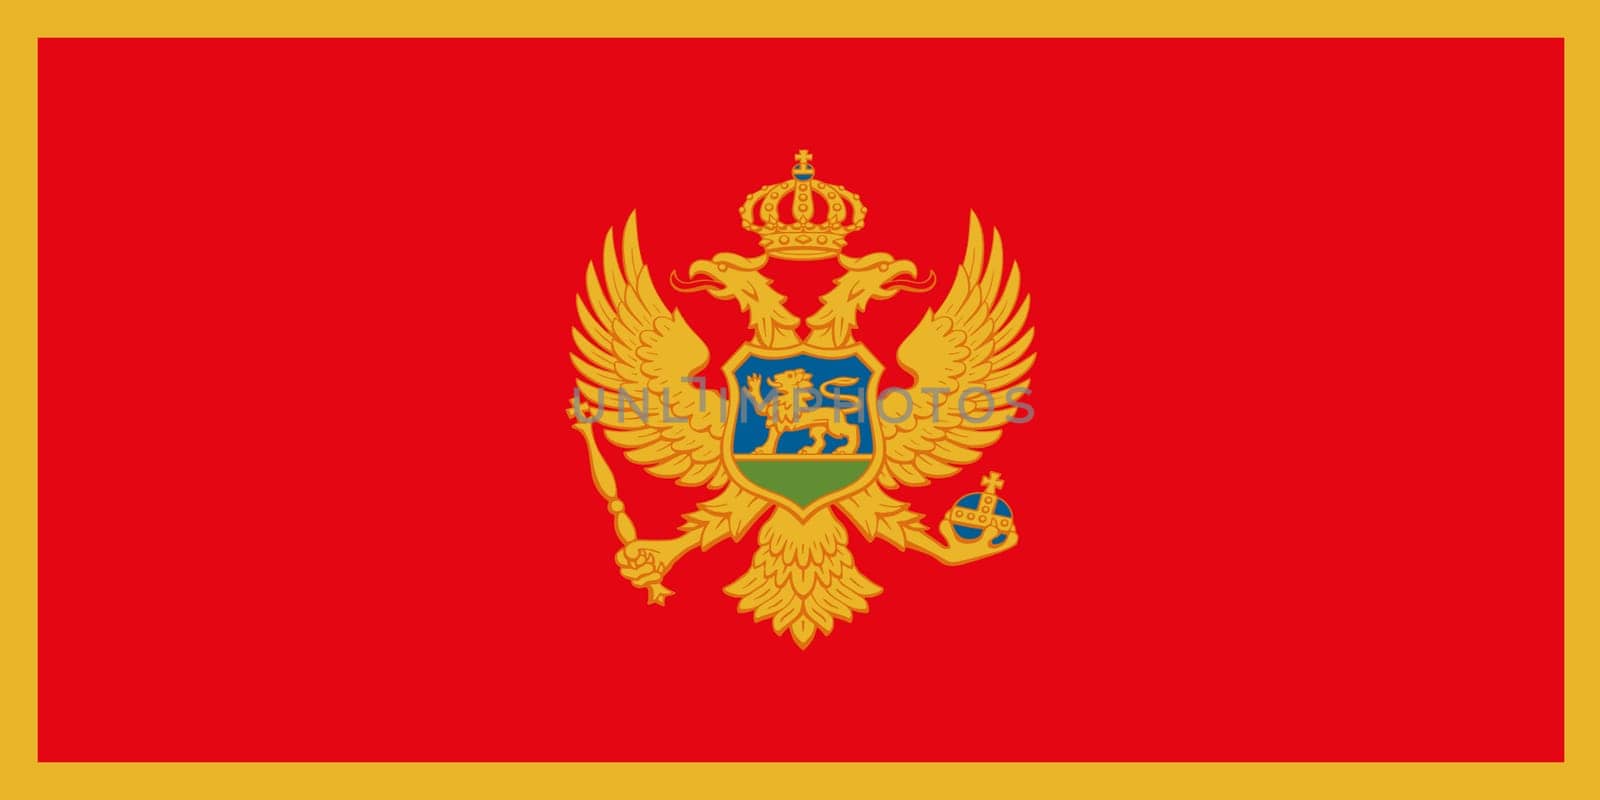 A Montenegro flag background illustration red blue yellow crest